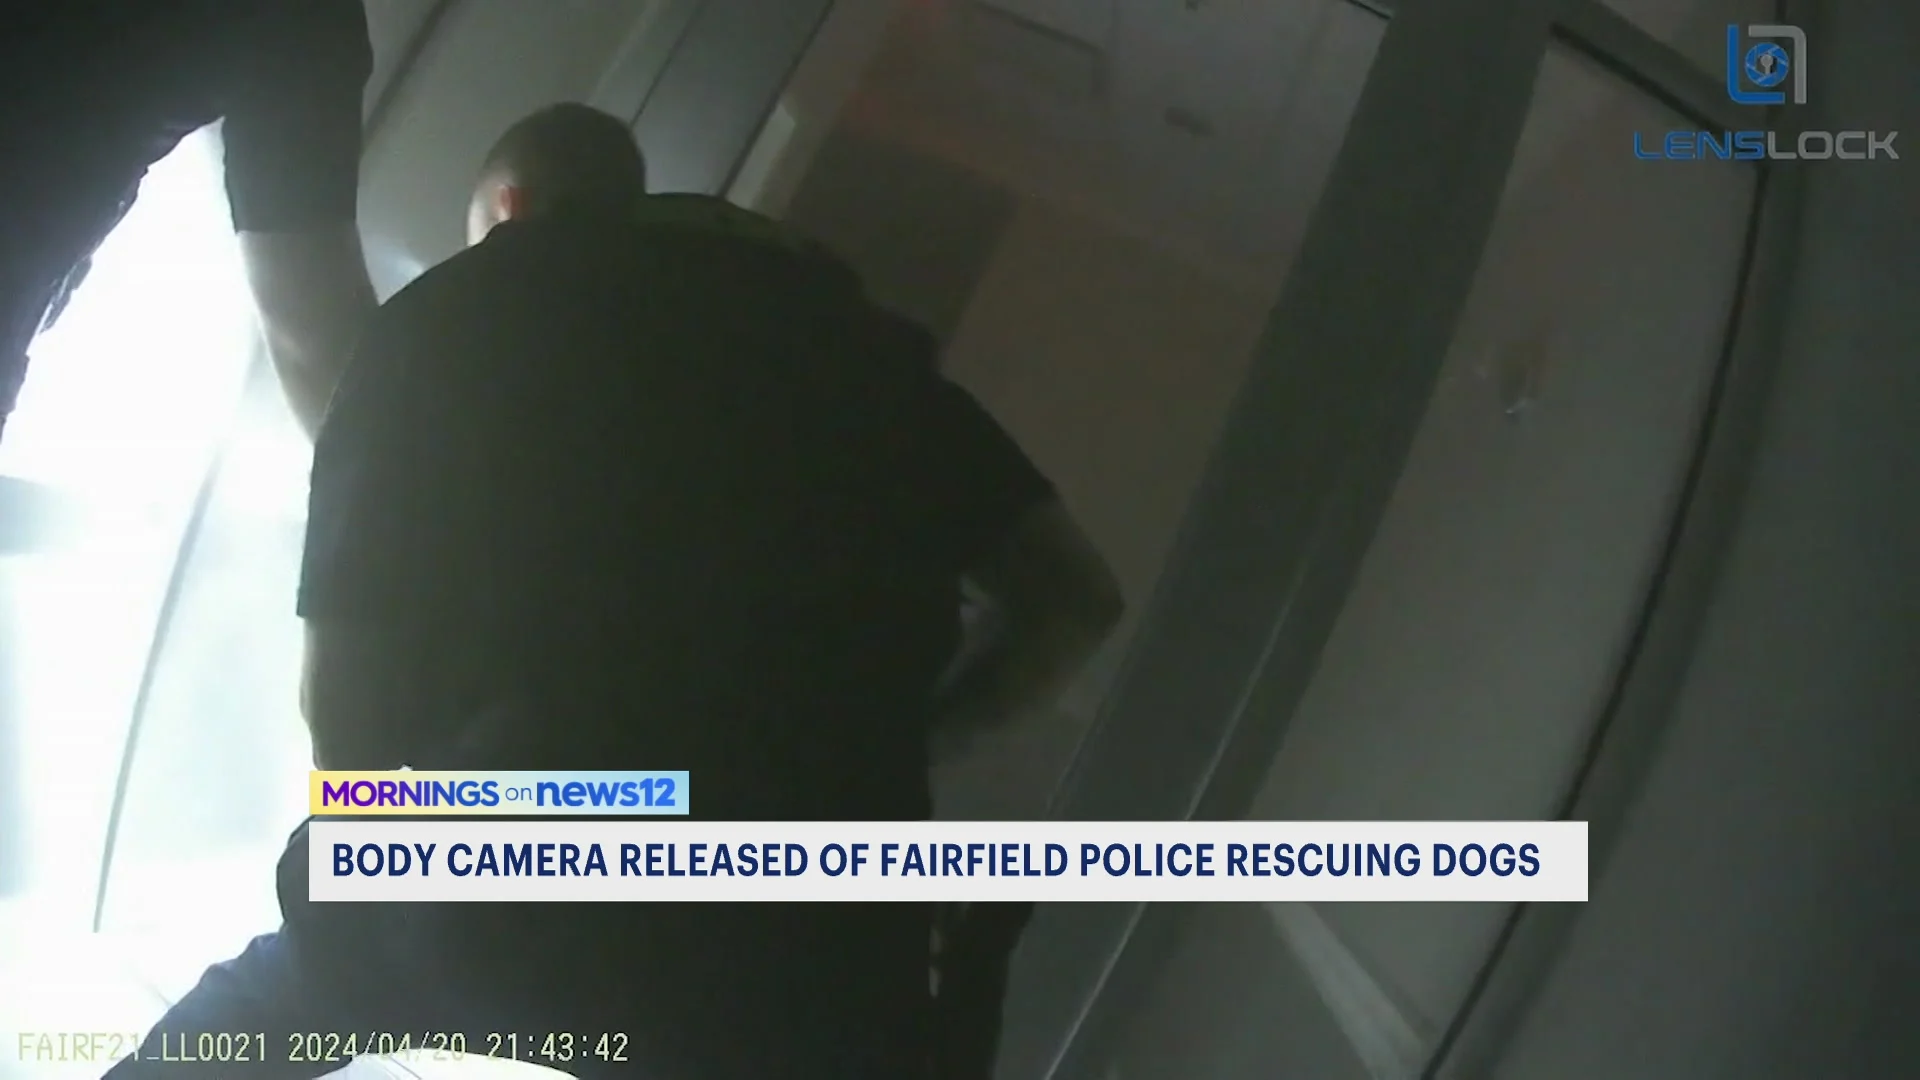 Security camera footage captures police officers saving dogs at Fairfield business complex